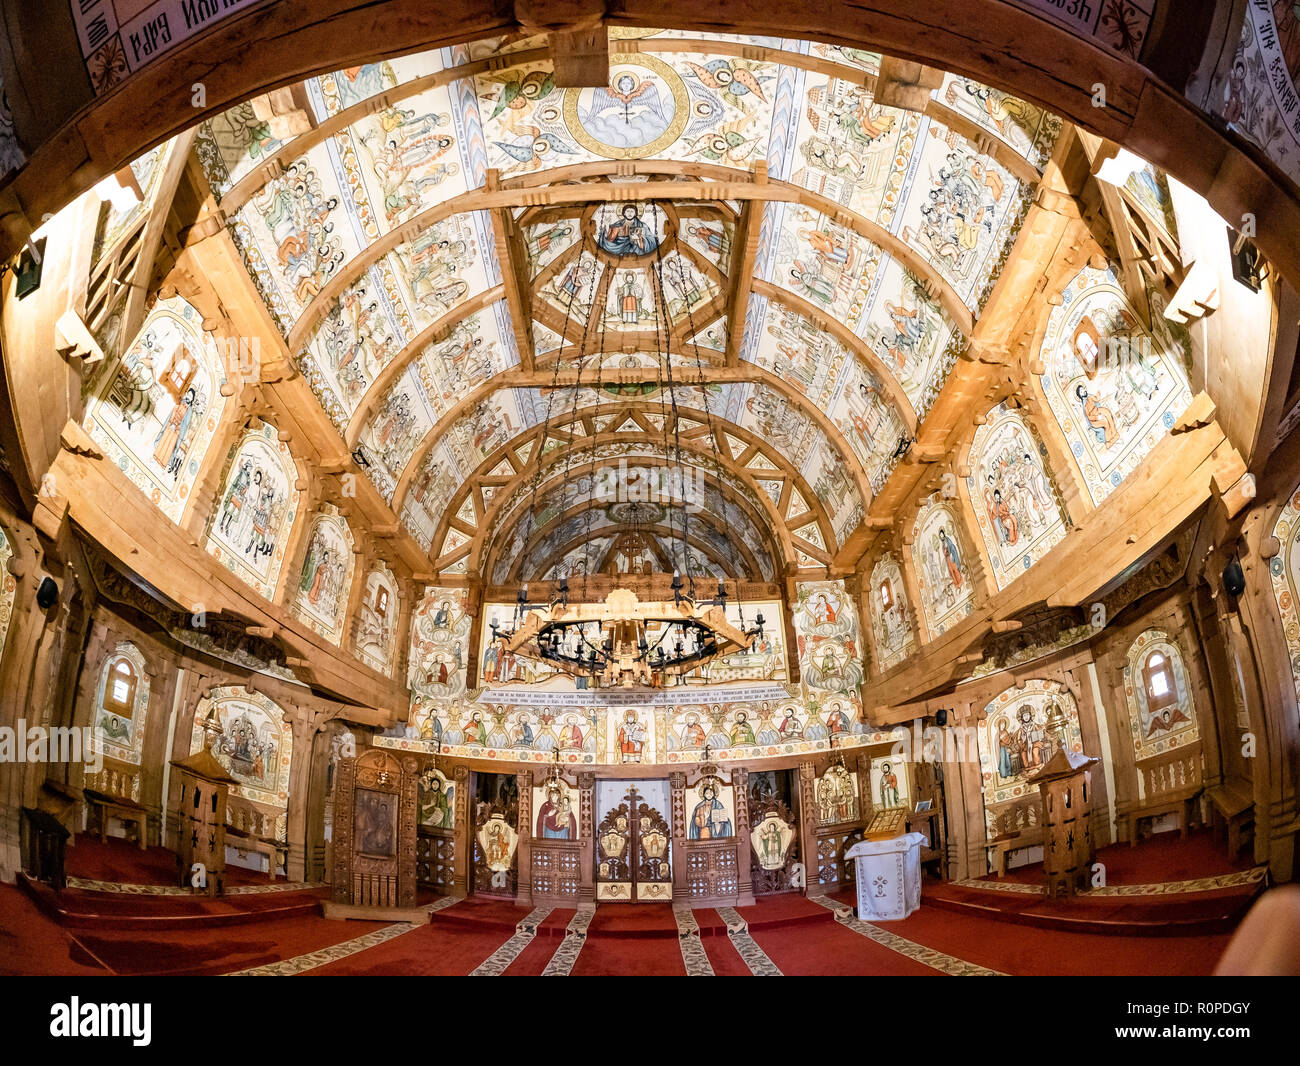 Wide view of Barsana monastery inside the church, with traditional Christian icons painting, in Maramures region, Romania Stock Photo